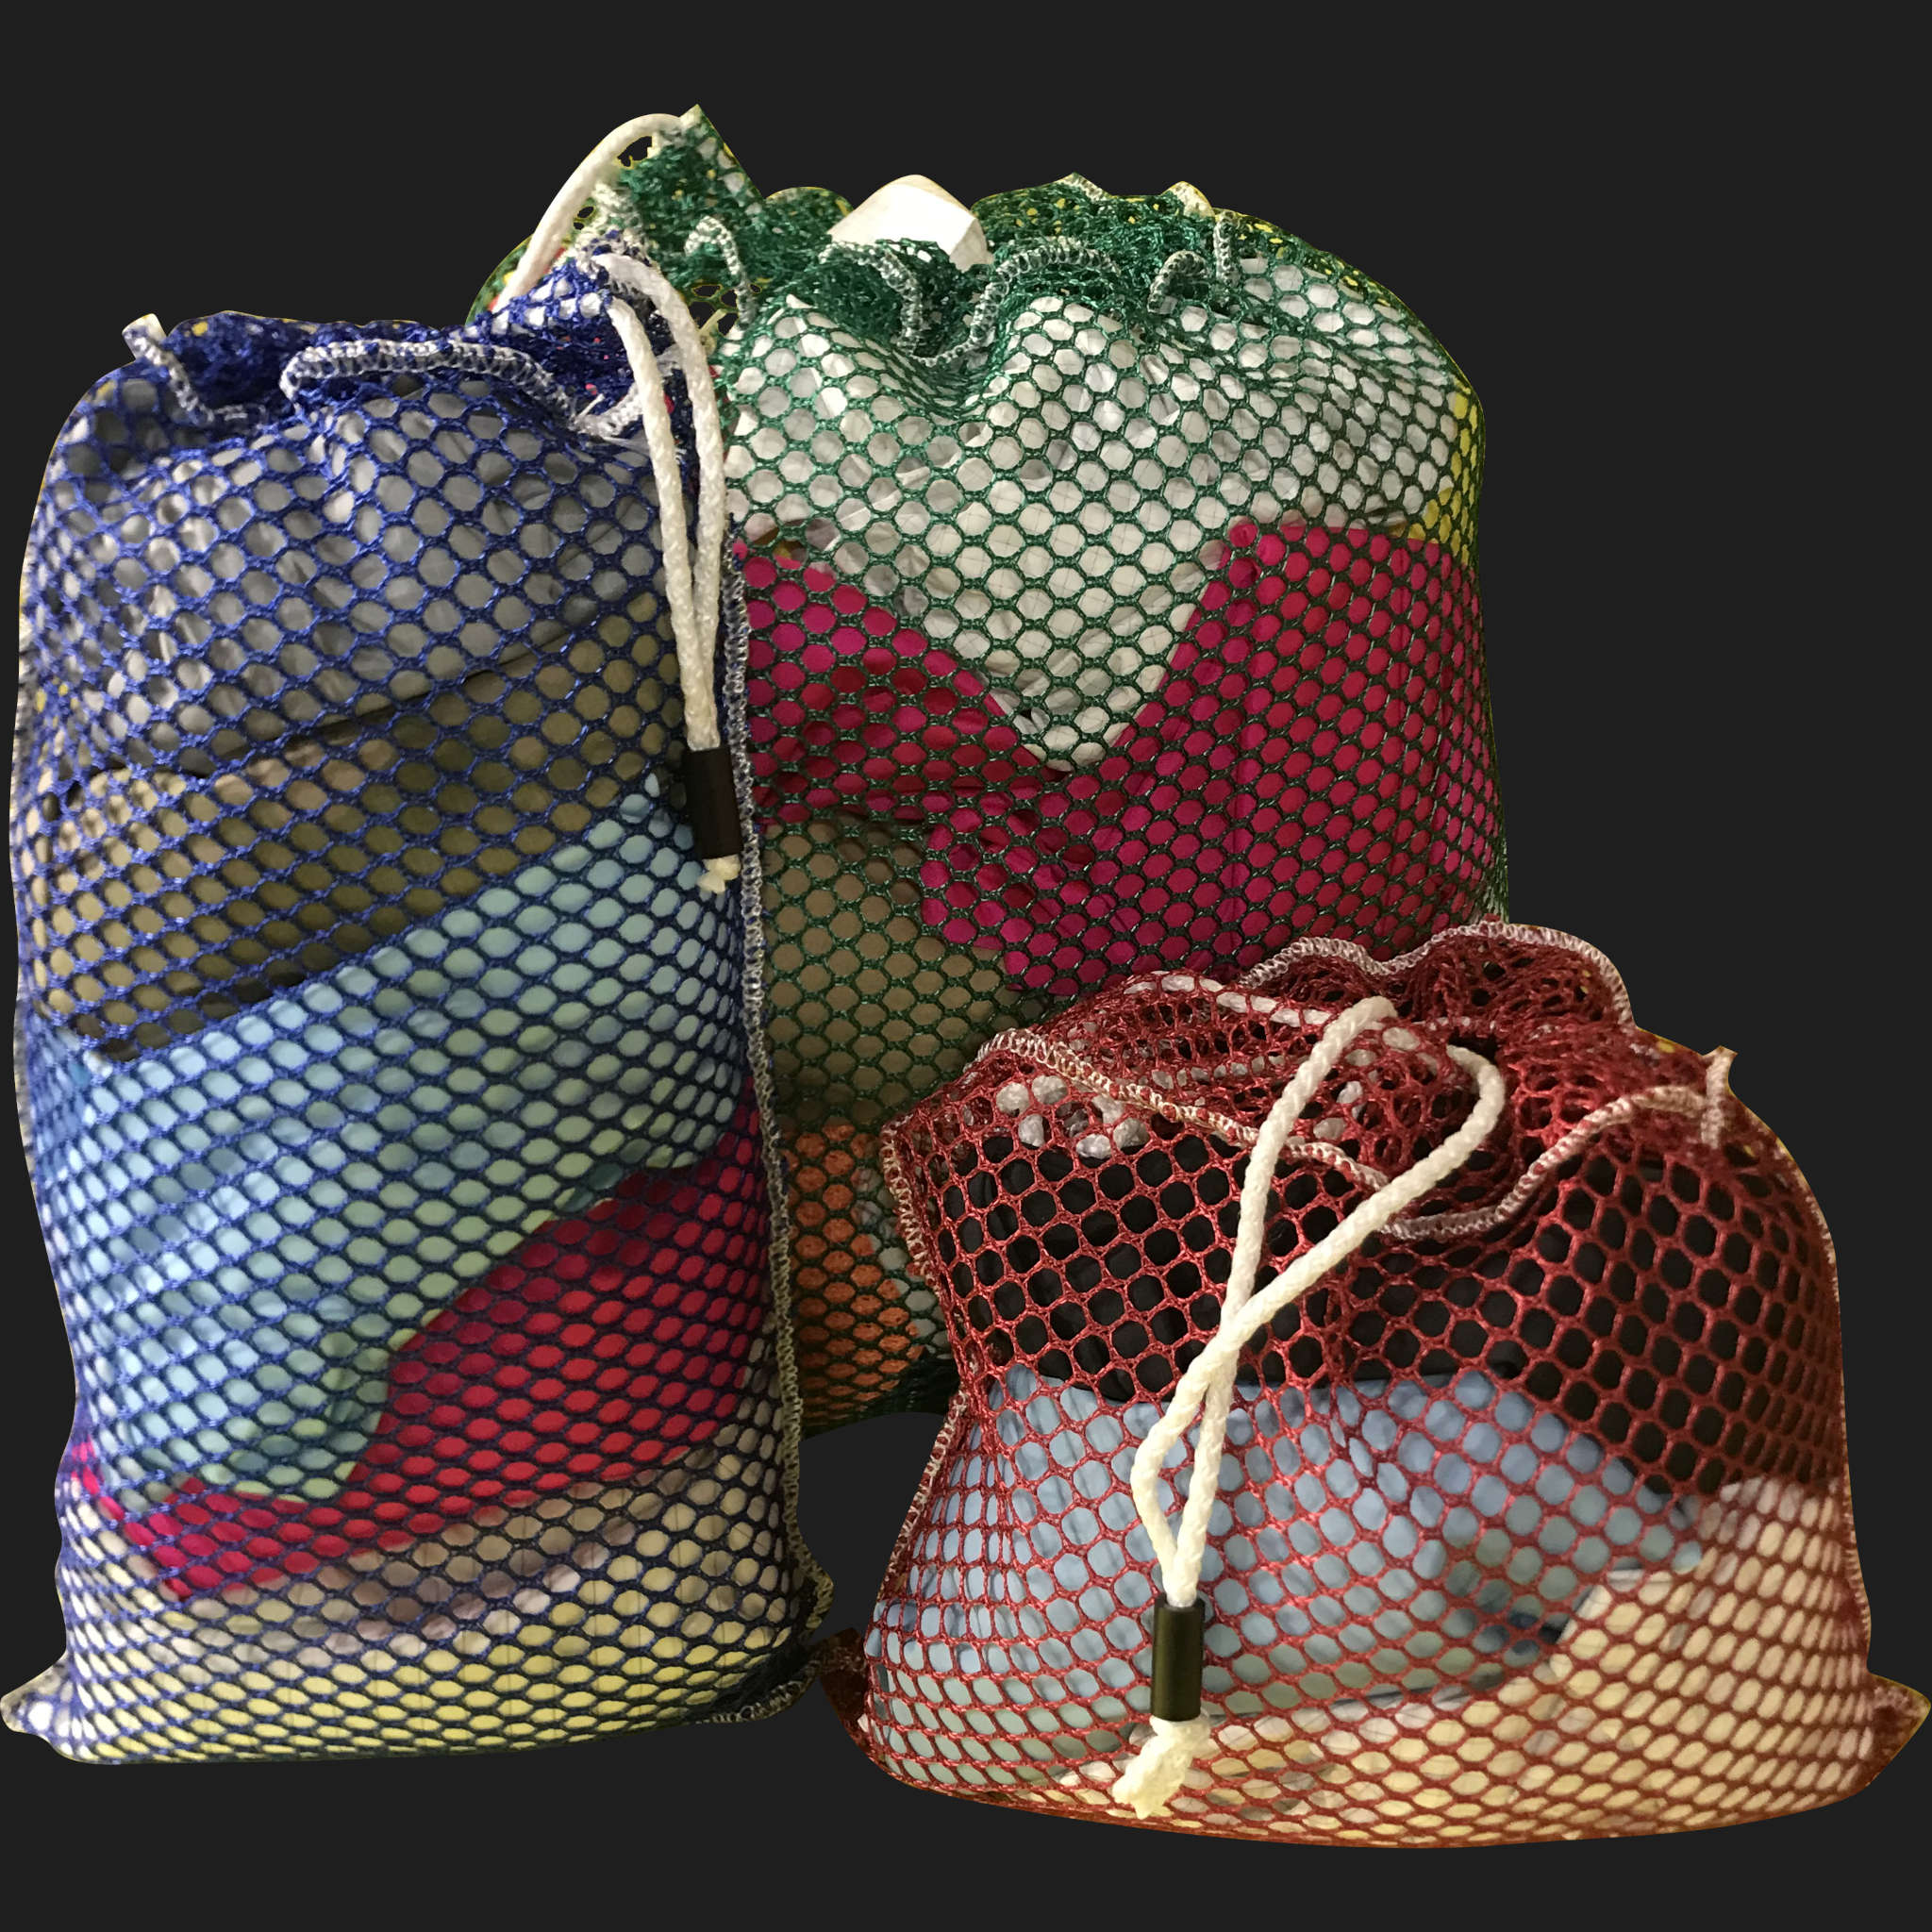 20" x 32" Customized Mesh-Net-Laundry Bags Heavy Duty with Cord and barrellock closure